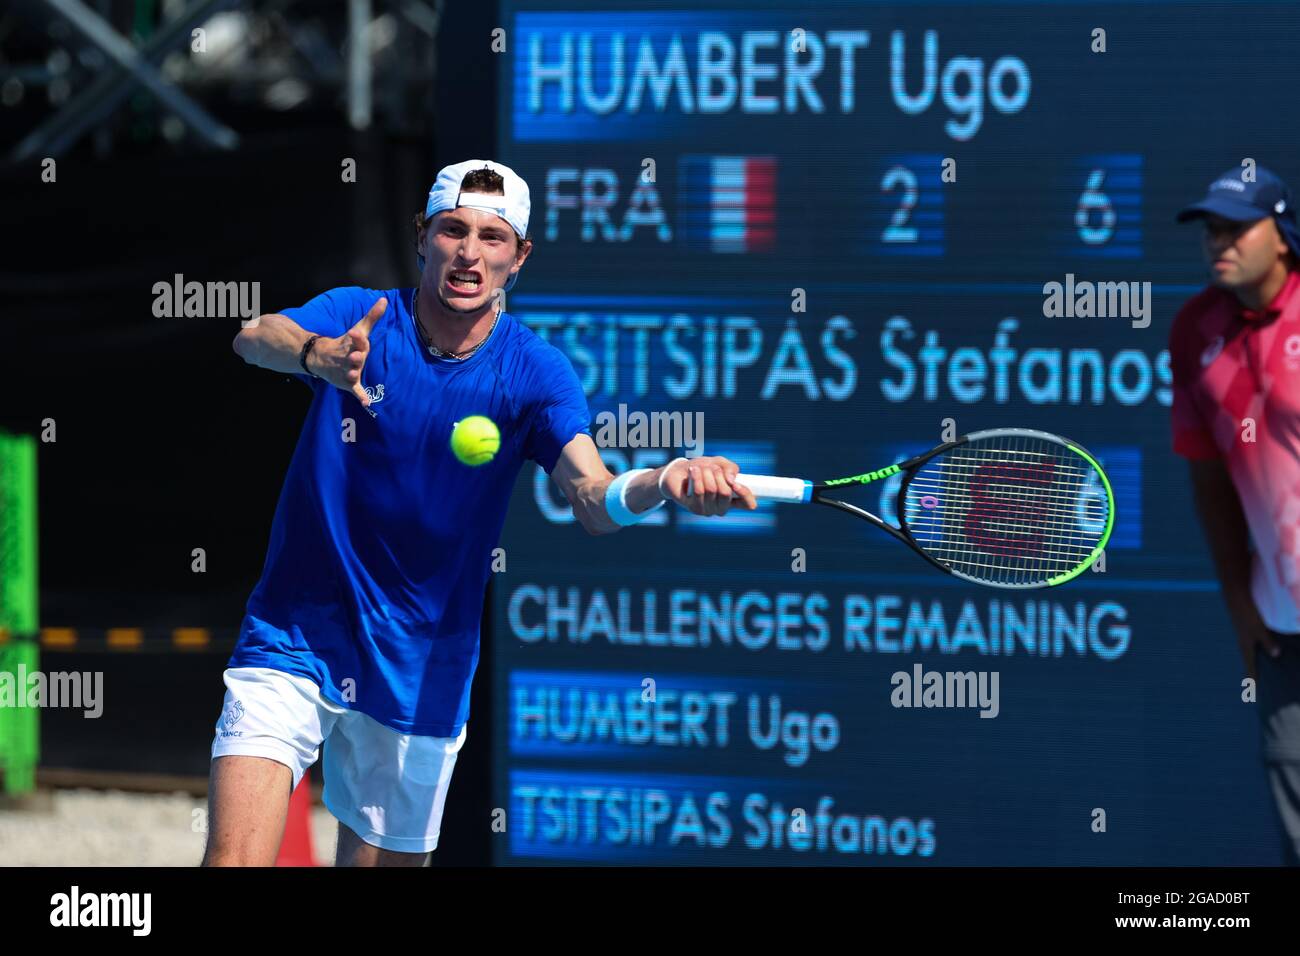 Tokyo, Japan, 28 July, 2021. Ugo Humber plays a shot during the Men's Tennis Round 3 match between Ugo Humbert of France and Stefanos Tsitsipas of Greece on Day 5 of the 2020 Tokyo Olympic Games (Photo by Pete Dovgan/Speed Media/Alamy Live News) Stock Photo